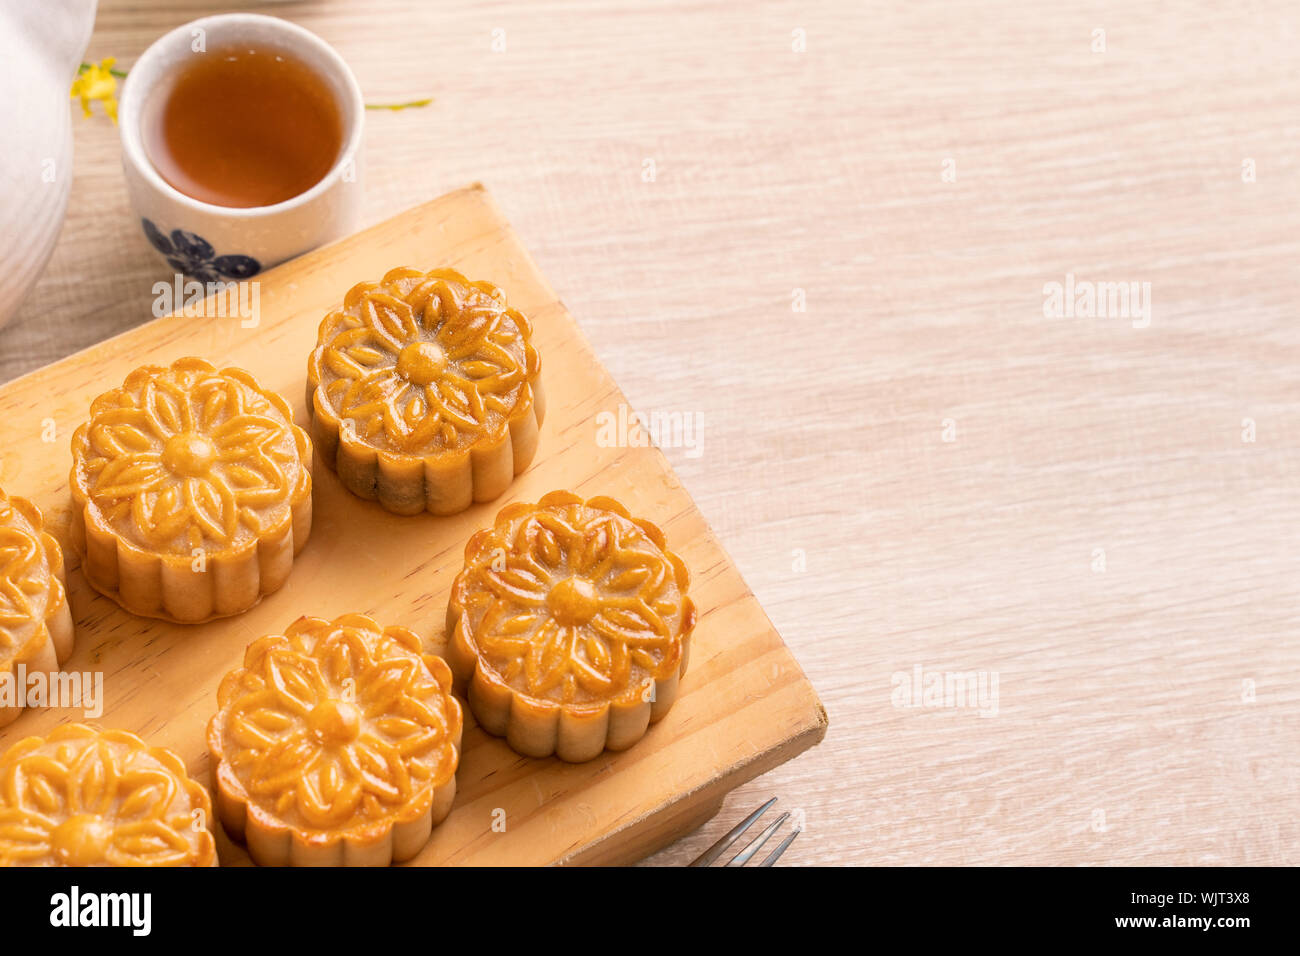 Moon cakes with tea on bright wooden table and serving try, holiday concept of Mid-Autumn festival traditional food layout design, close up, copy spac Stock Photo